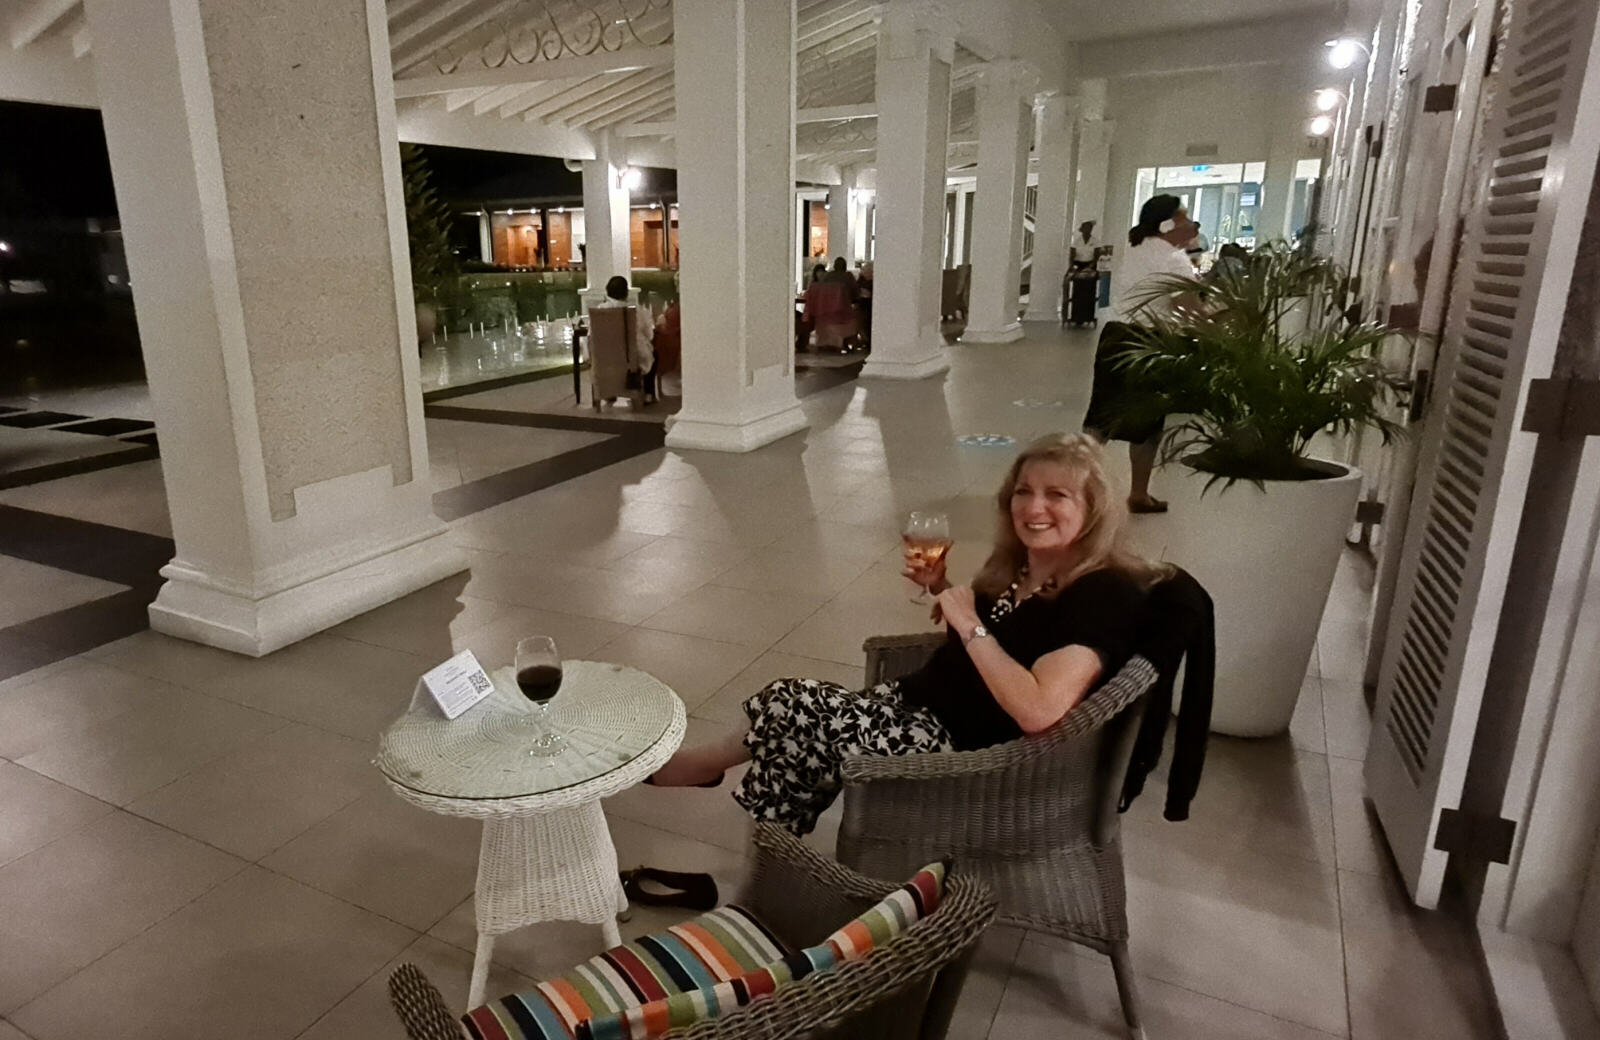 Drinks on the terrace of the Grand Pacific hotel in Suva, Fiji